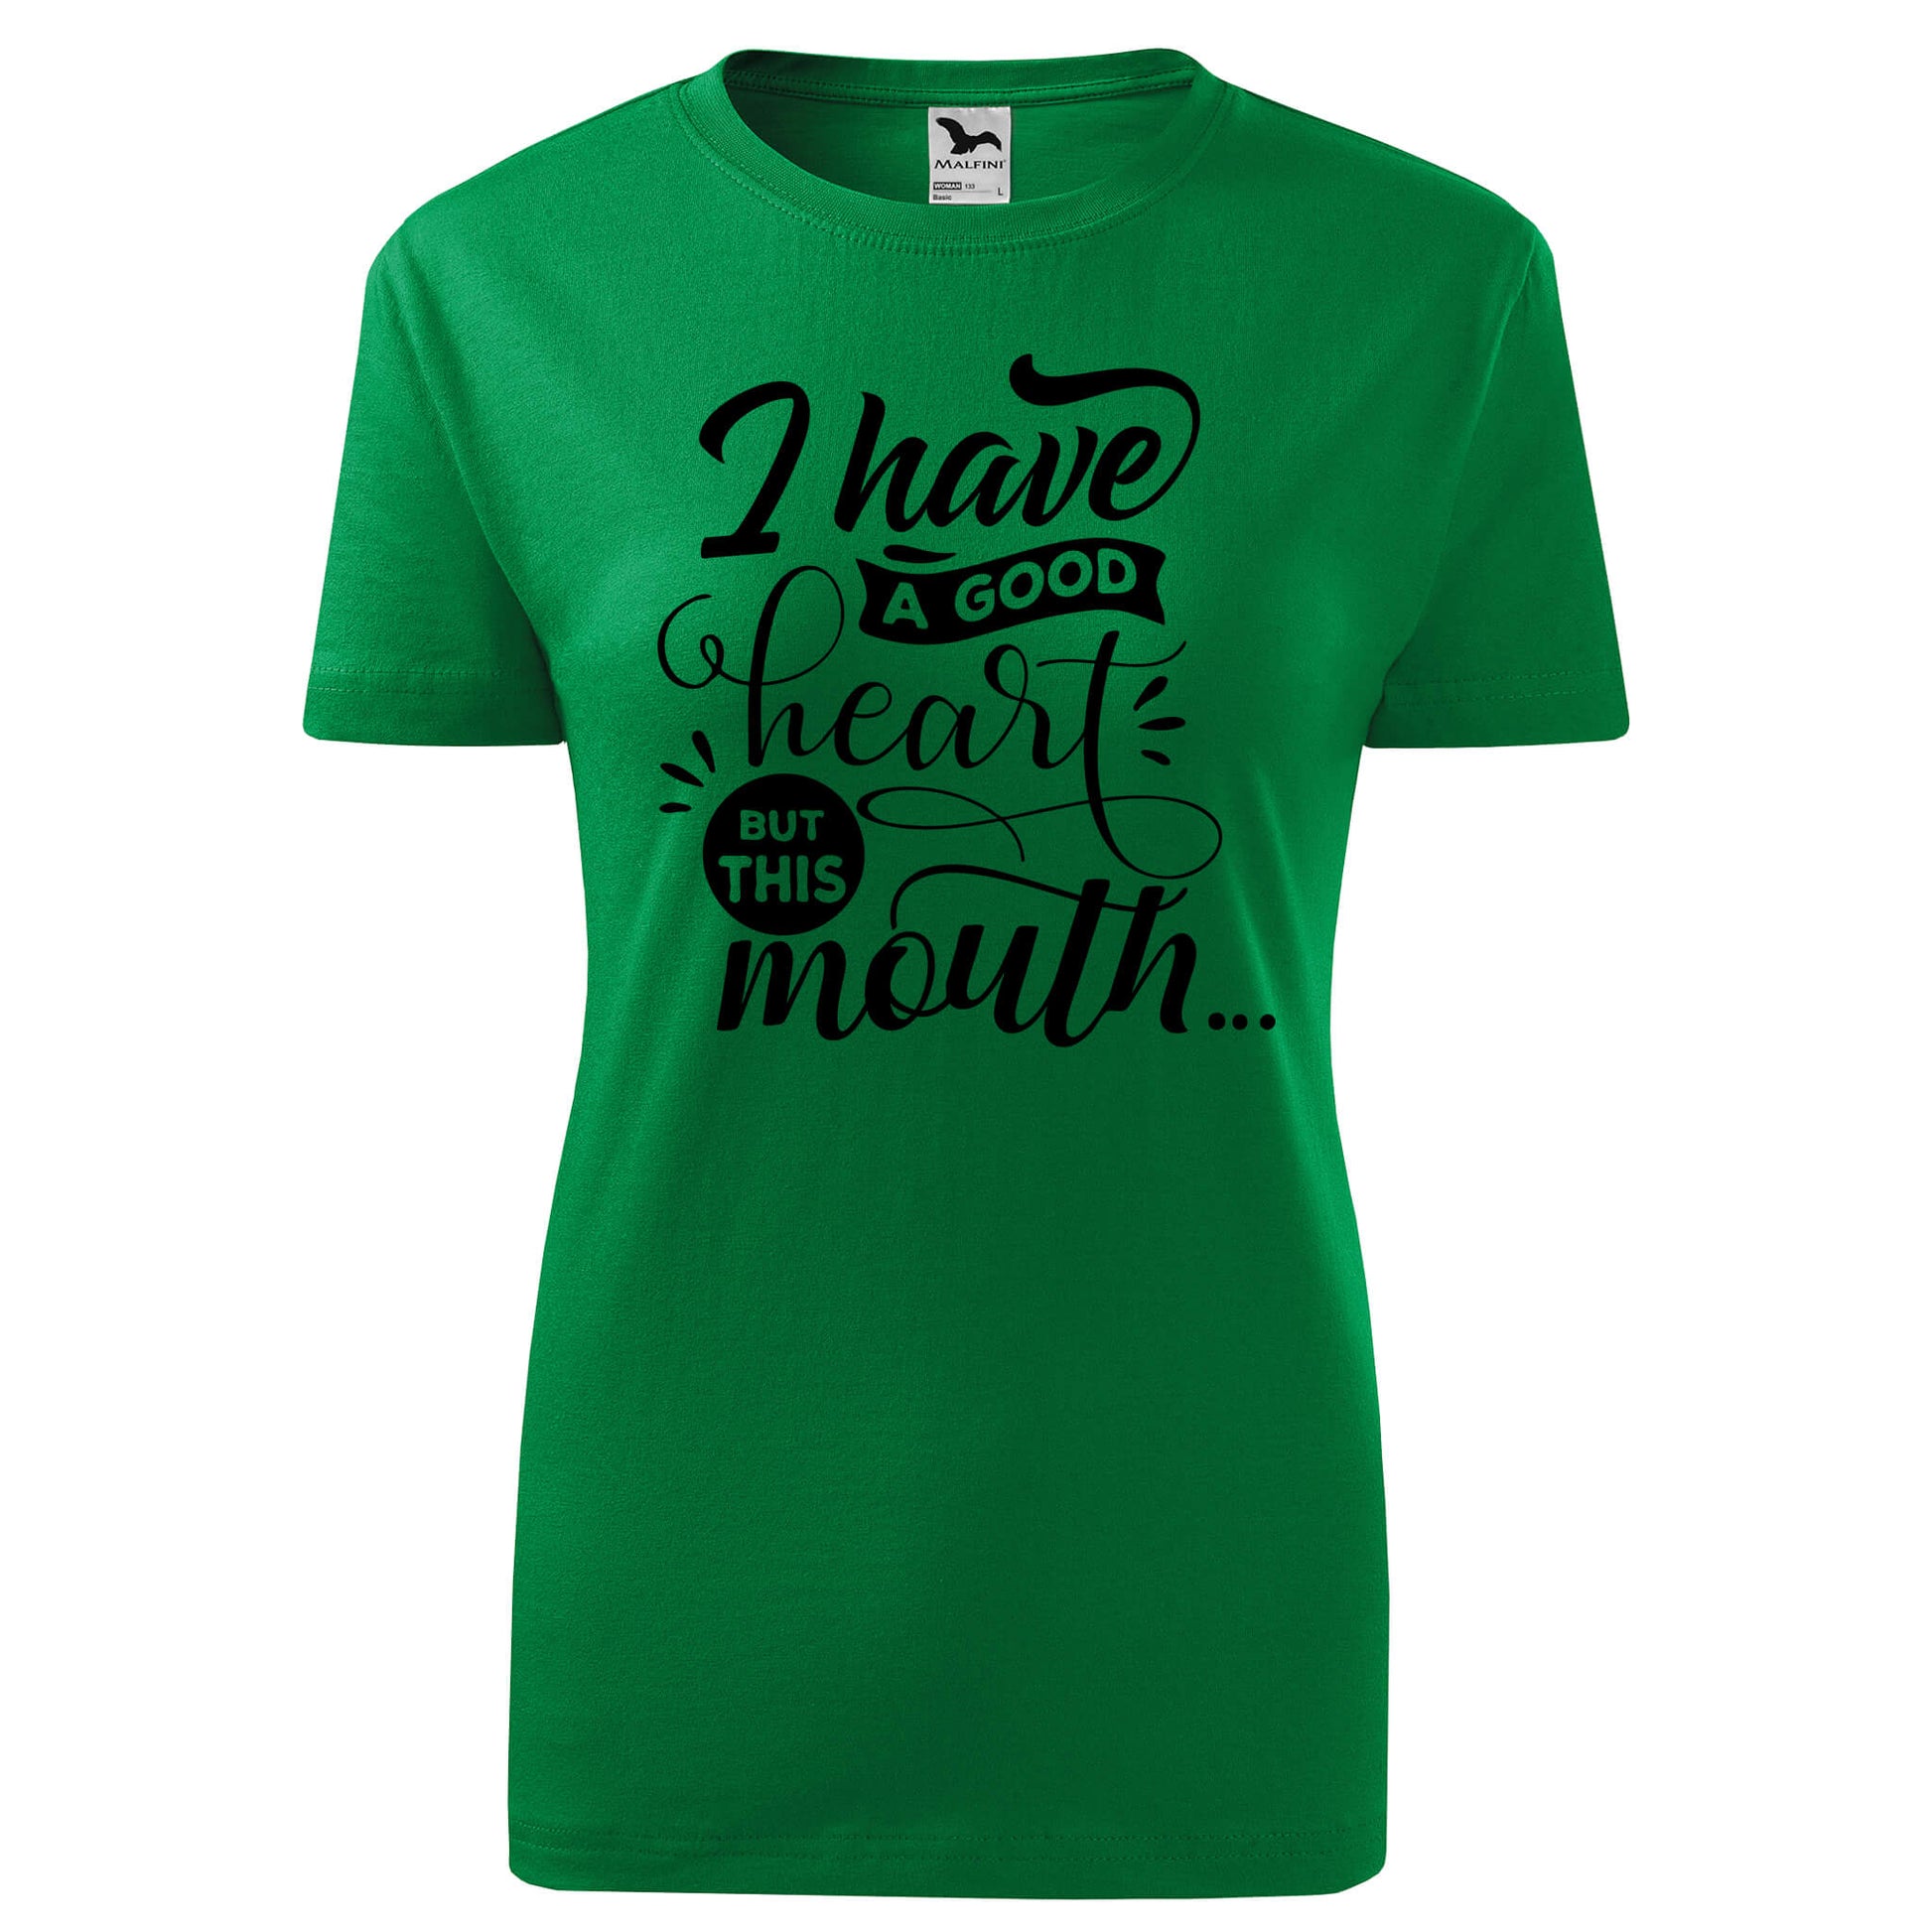 I have a good heart but this mouth t-shirt - rvdesignprint